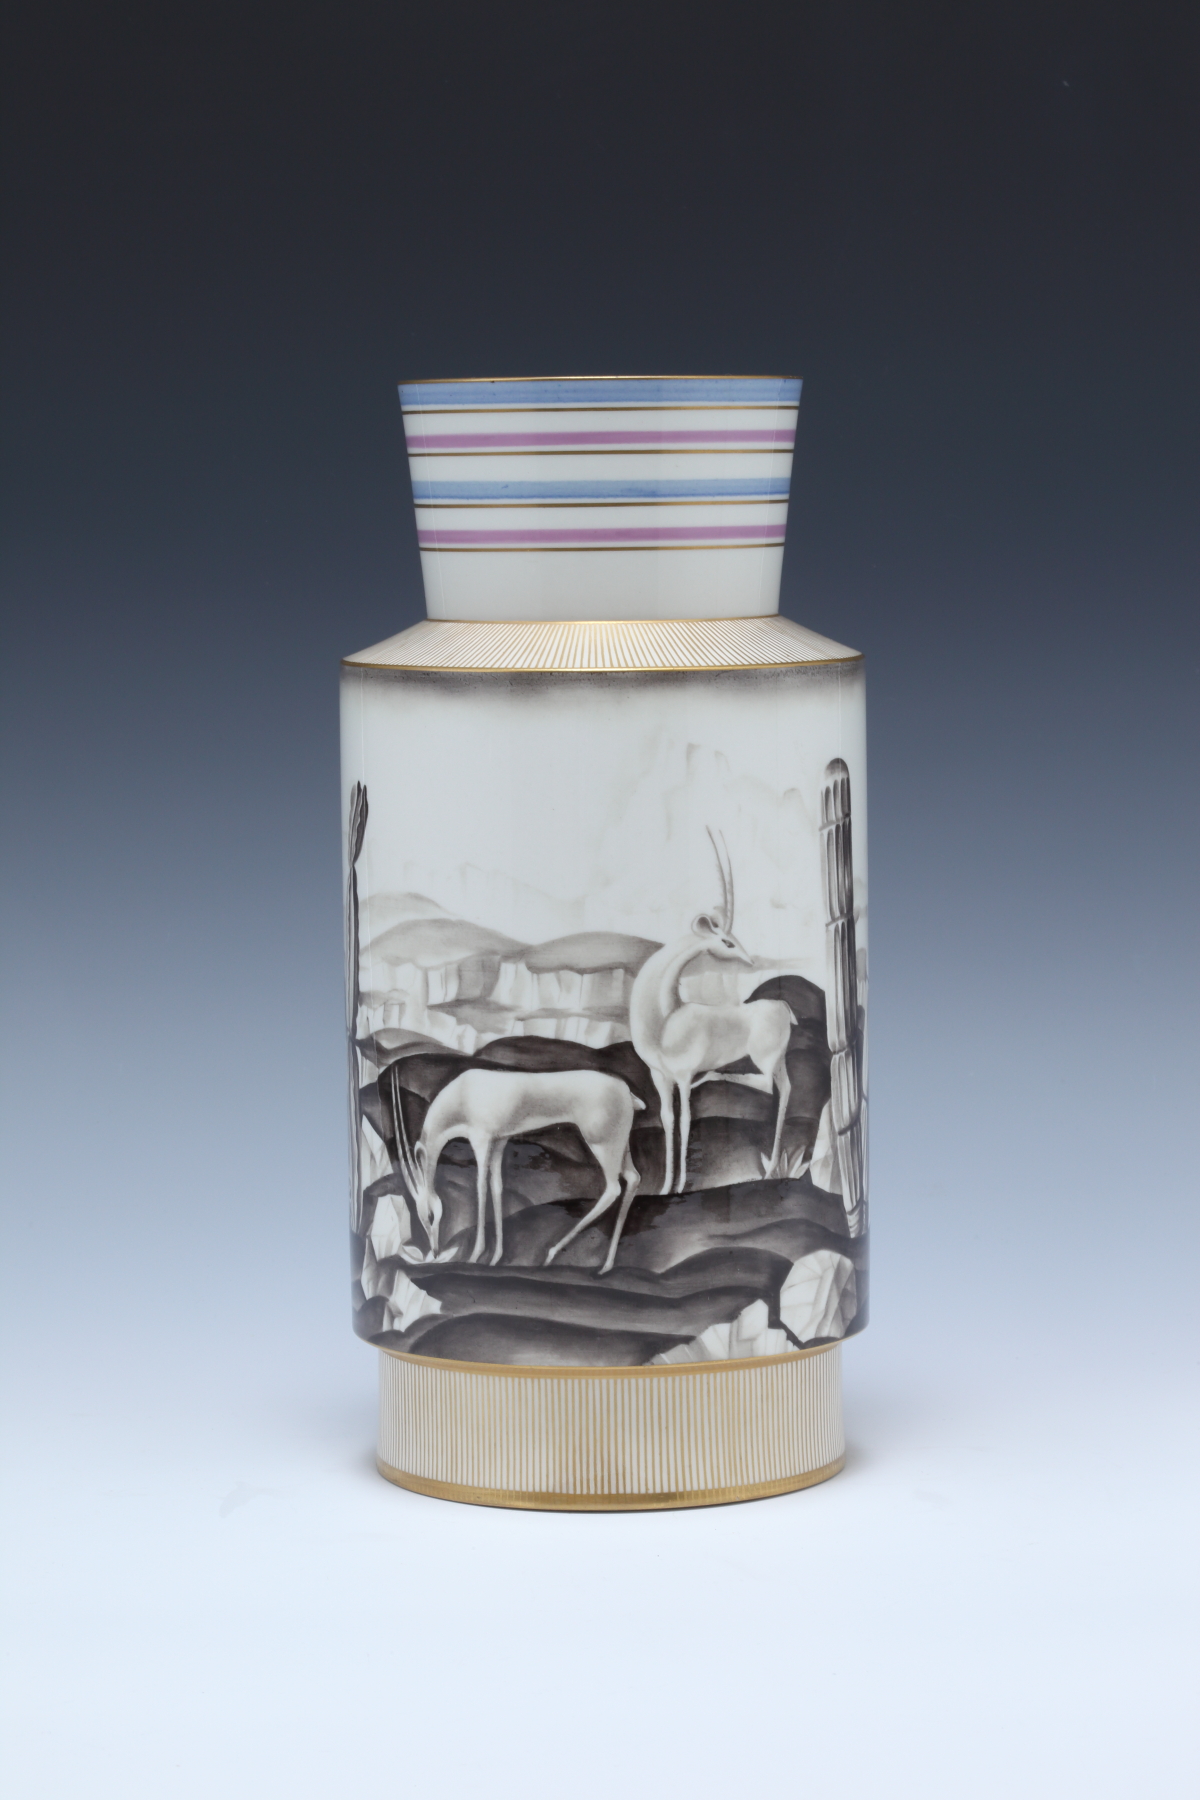 form designer: Anne-Marie FONTAINE, manufactory: Sèvres manufactory, Vase, Anne-Marie FONTAINE No.2, ca.1933. Collection of L'HOMME DE CHINEE